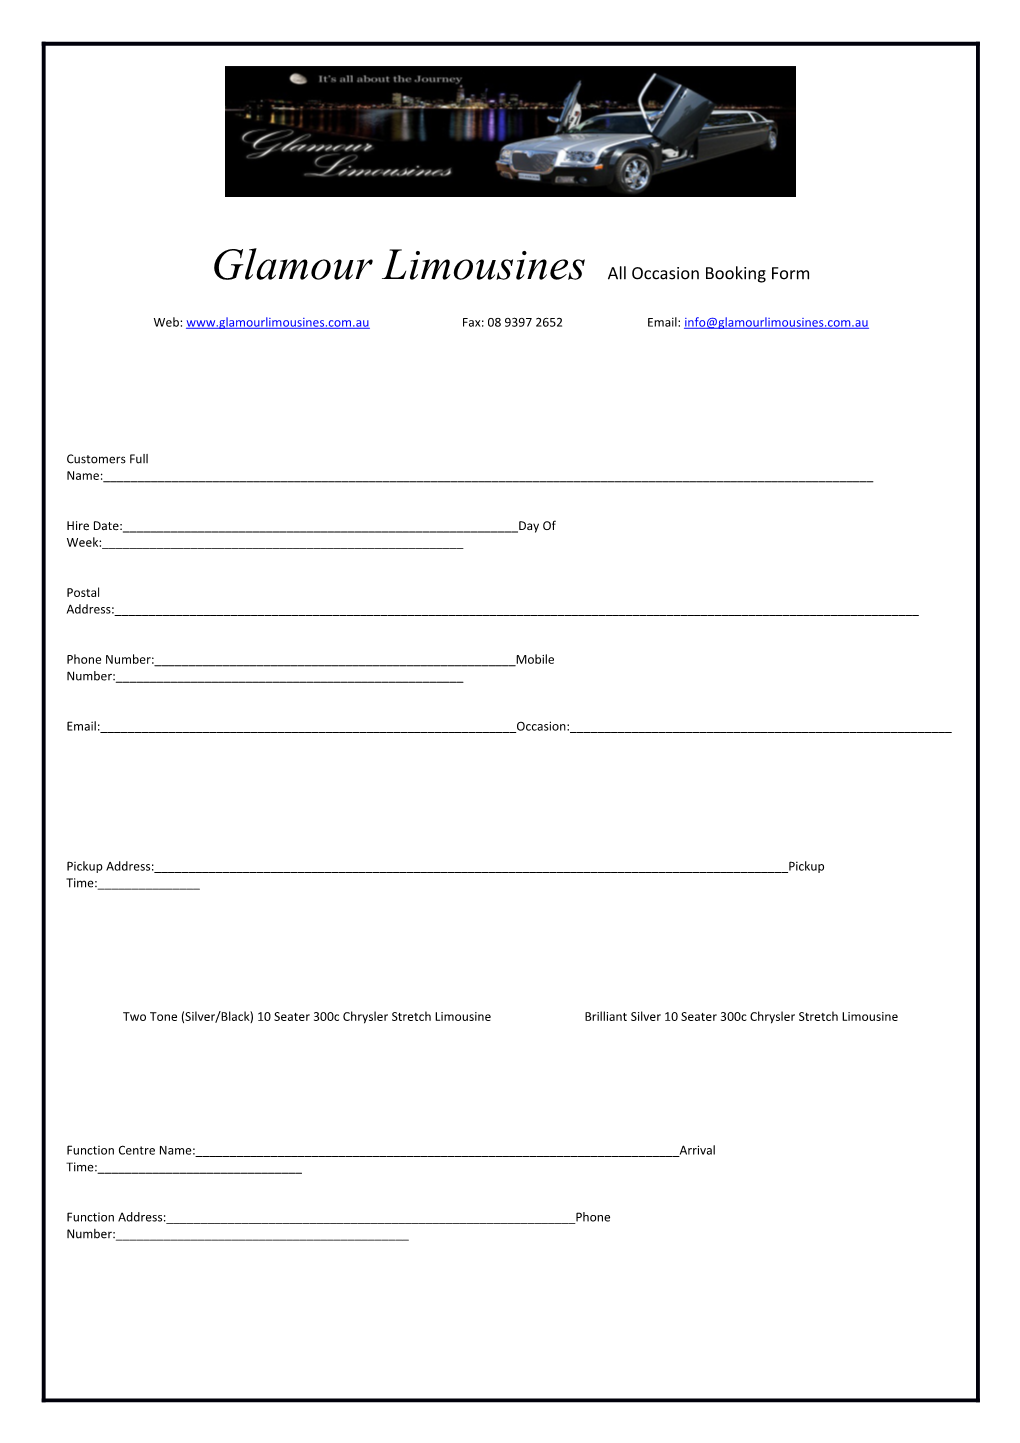 Glamour Limousines All Occasion Booking Form